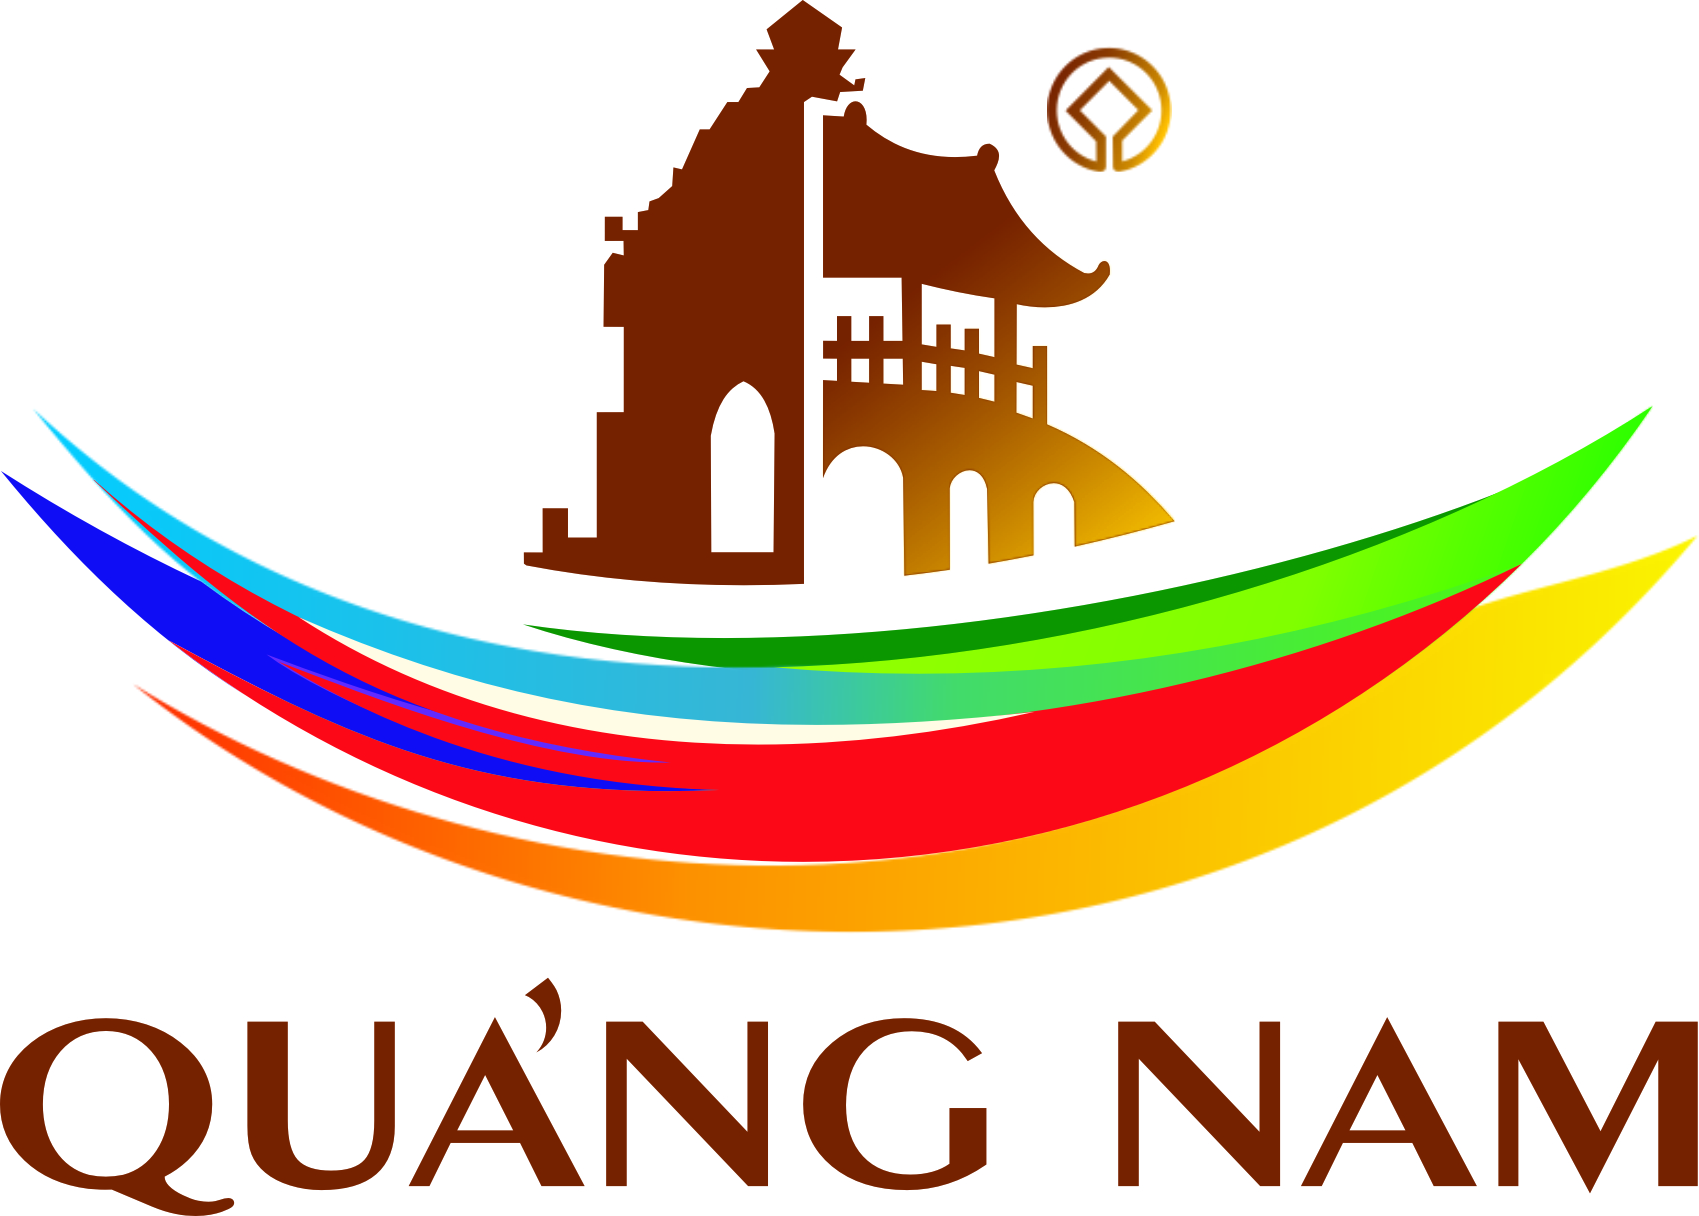 Quang Nam Tourism Promotion and Information Center